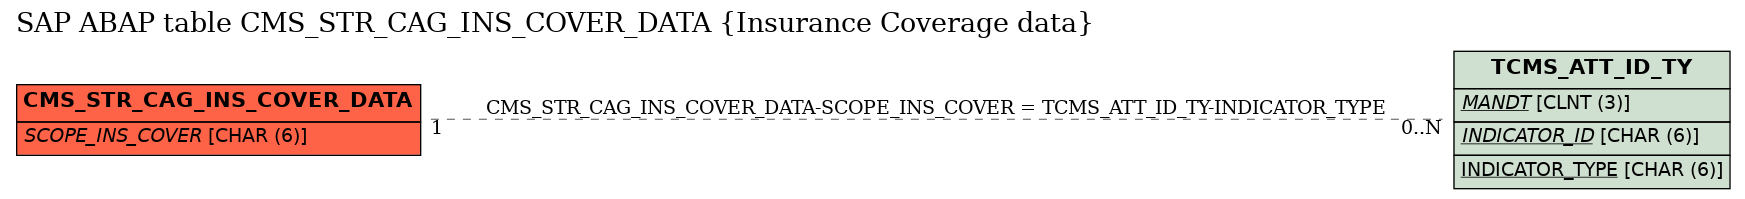 E-R Diagram for table CMS_STR_CAG_INS_COVER_DATA (Insurance Coverage data)